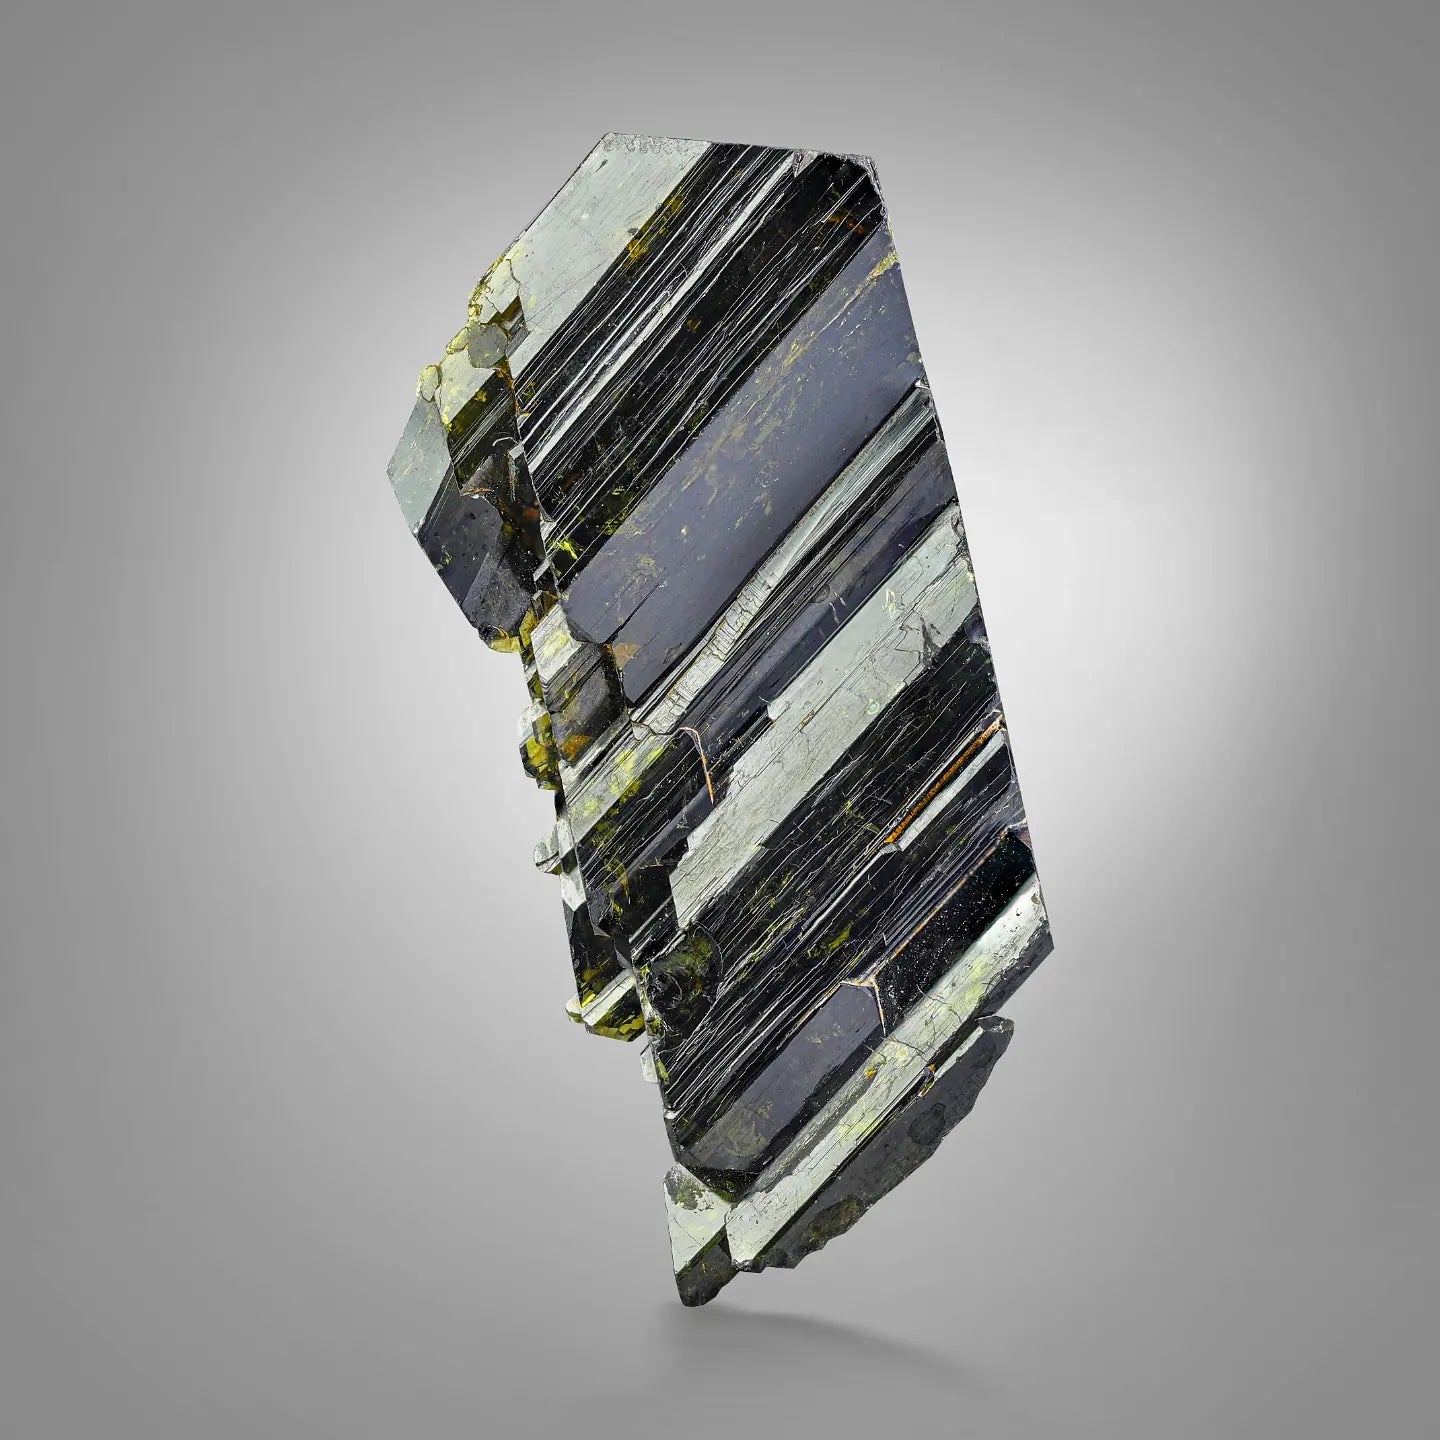 Rare Treasure Epidote Crystal with Greenish Color from Pakistan